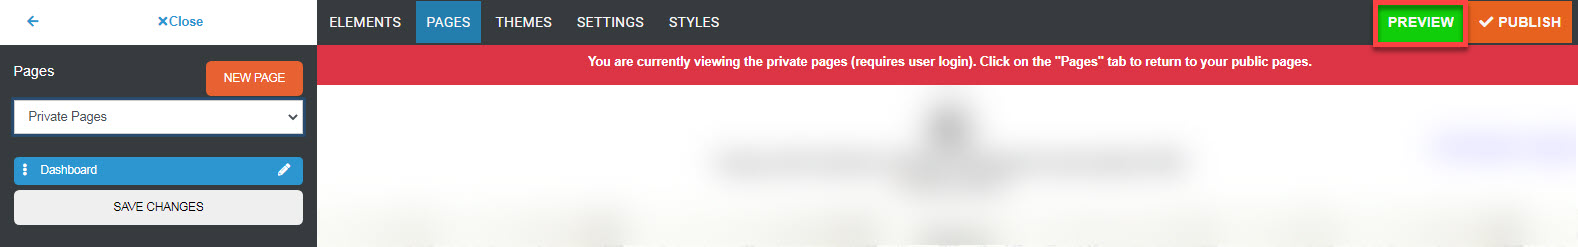 Private_page_preview.jpg